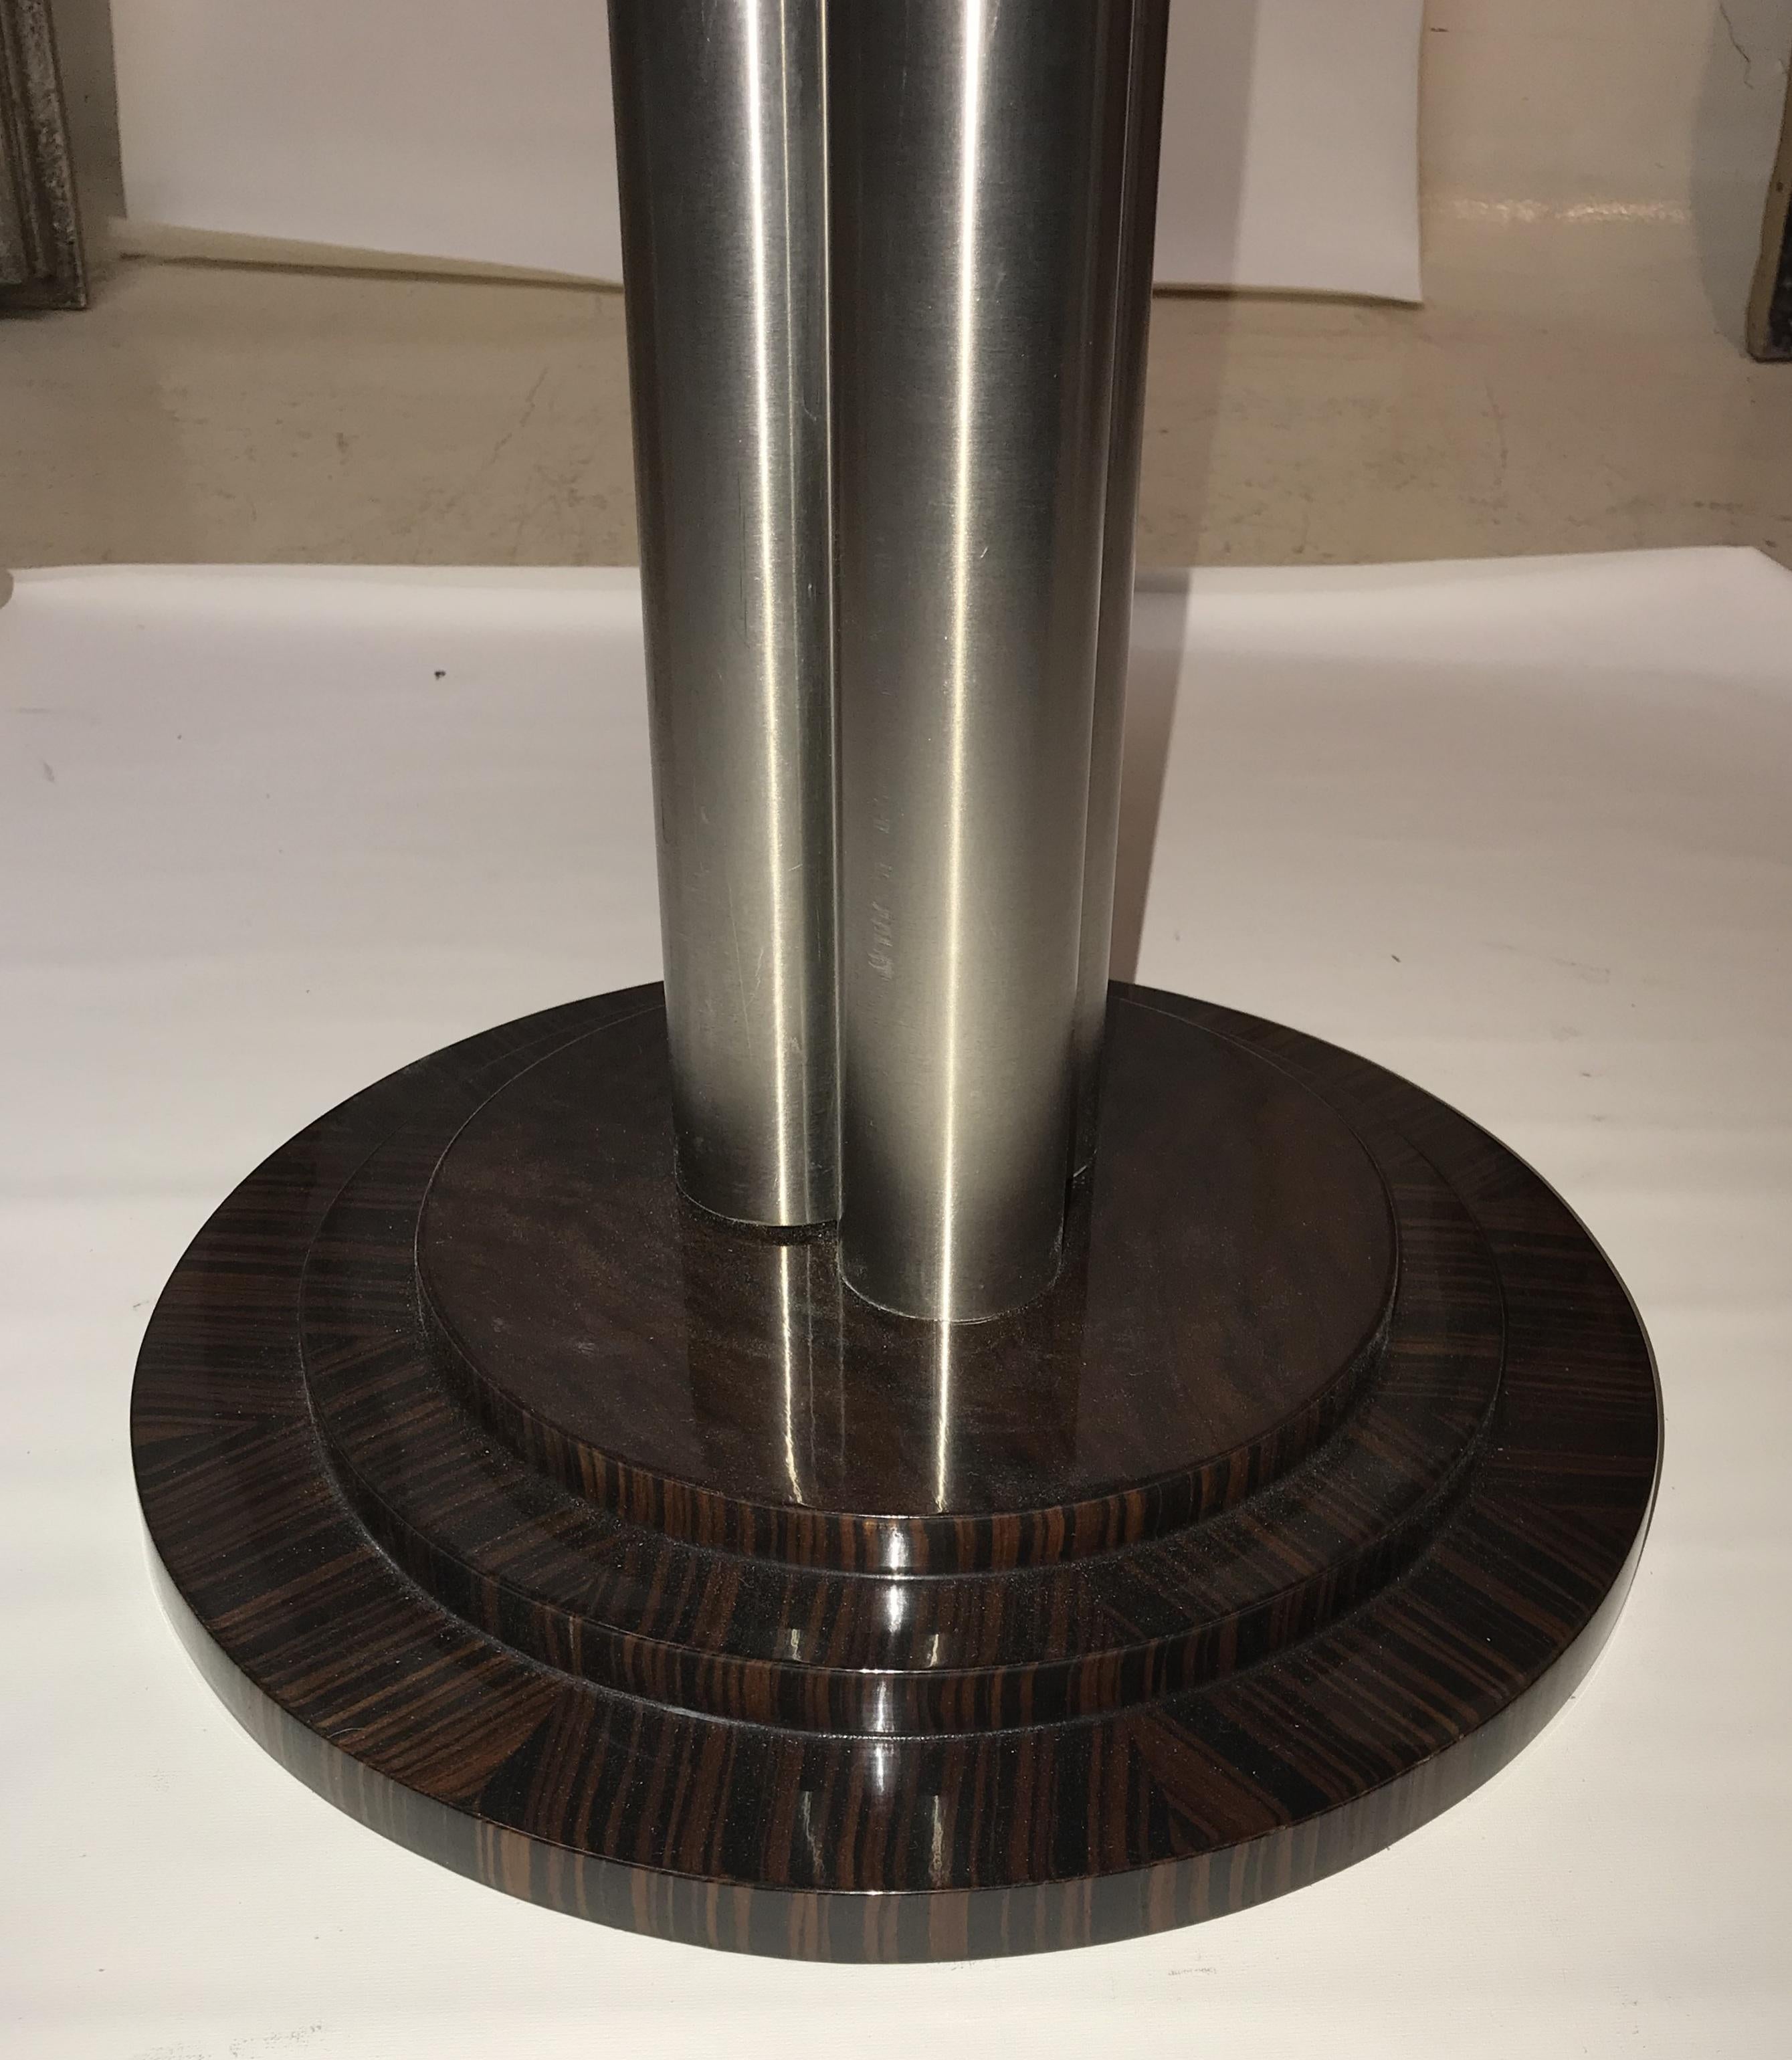 Two tables

Material: wood and chrome
Style: Art Deco
Country: France
We have specialized in the sale of Art Deco and Art Nouveau and Vintage styles since 1982. If you have any questions we are at your disposal.
Pushing the button that reads 'View